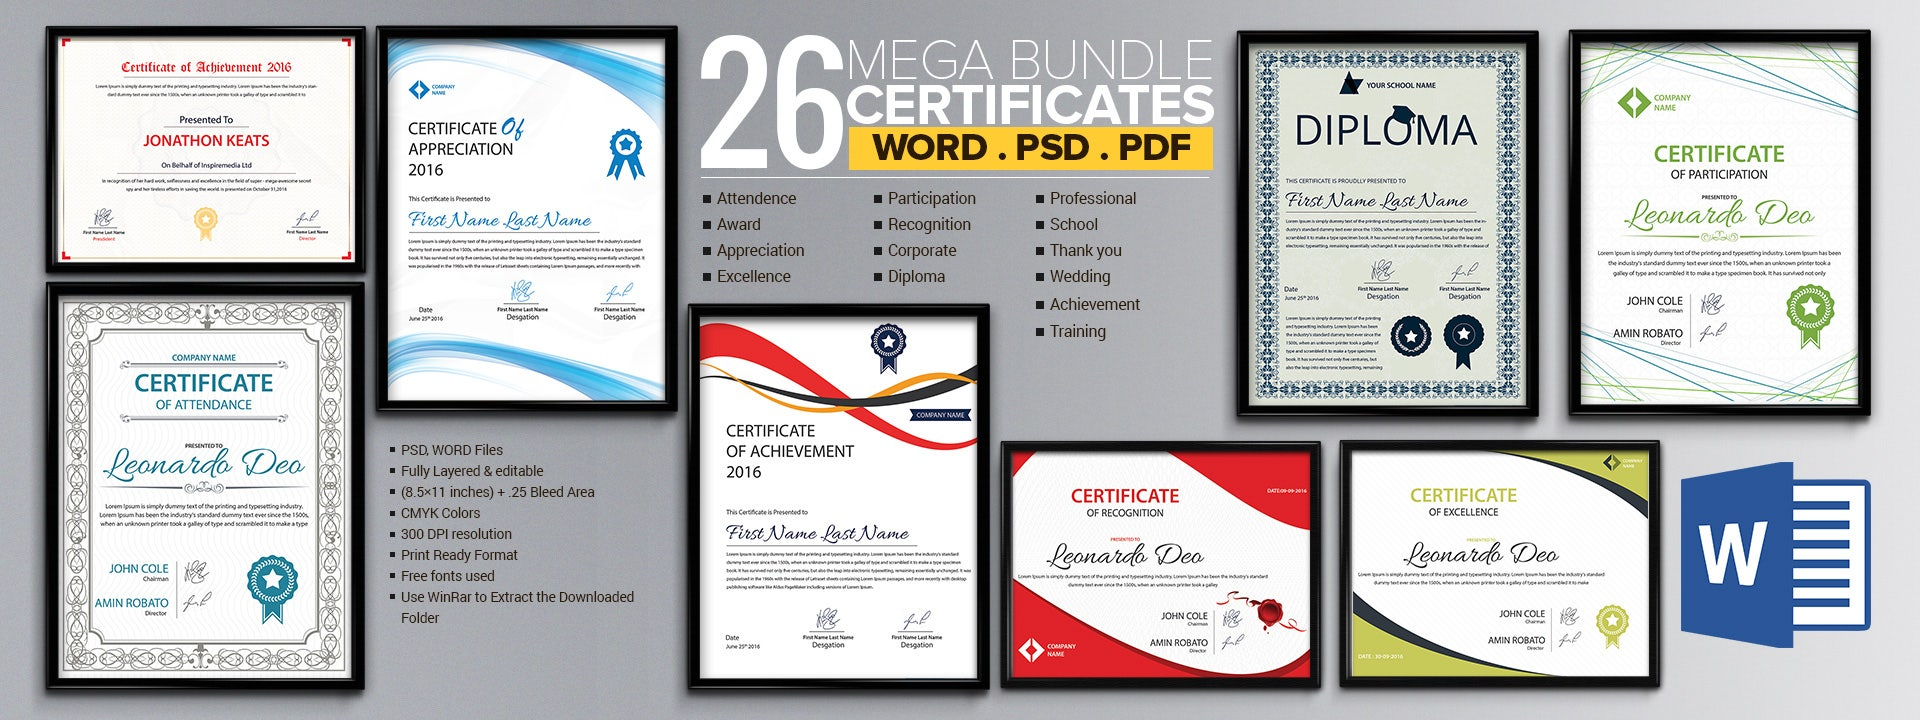 Word Certificate Template - 10+ Free Download Samples, Examples  With Regard To Free Certificate Templates For Word 2007